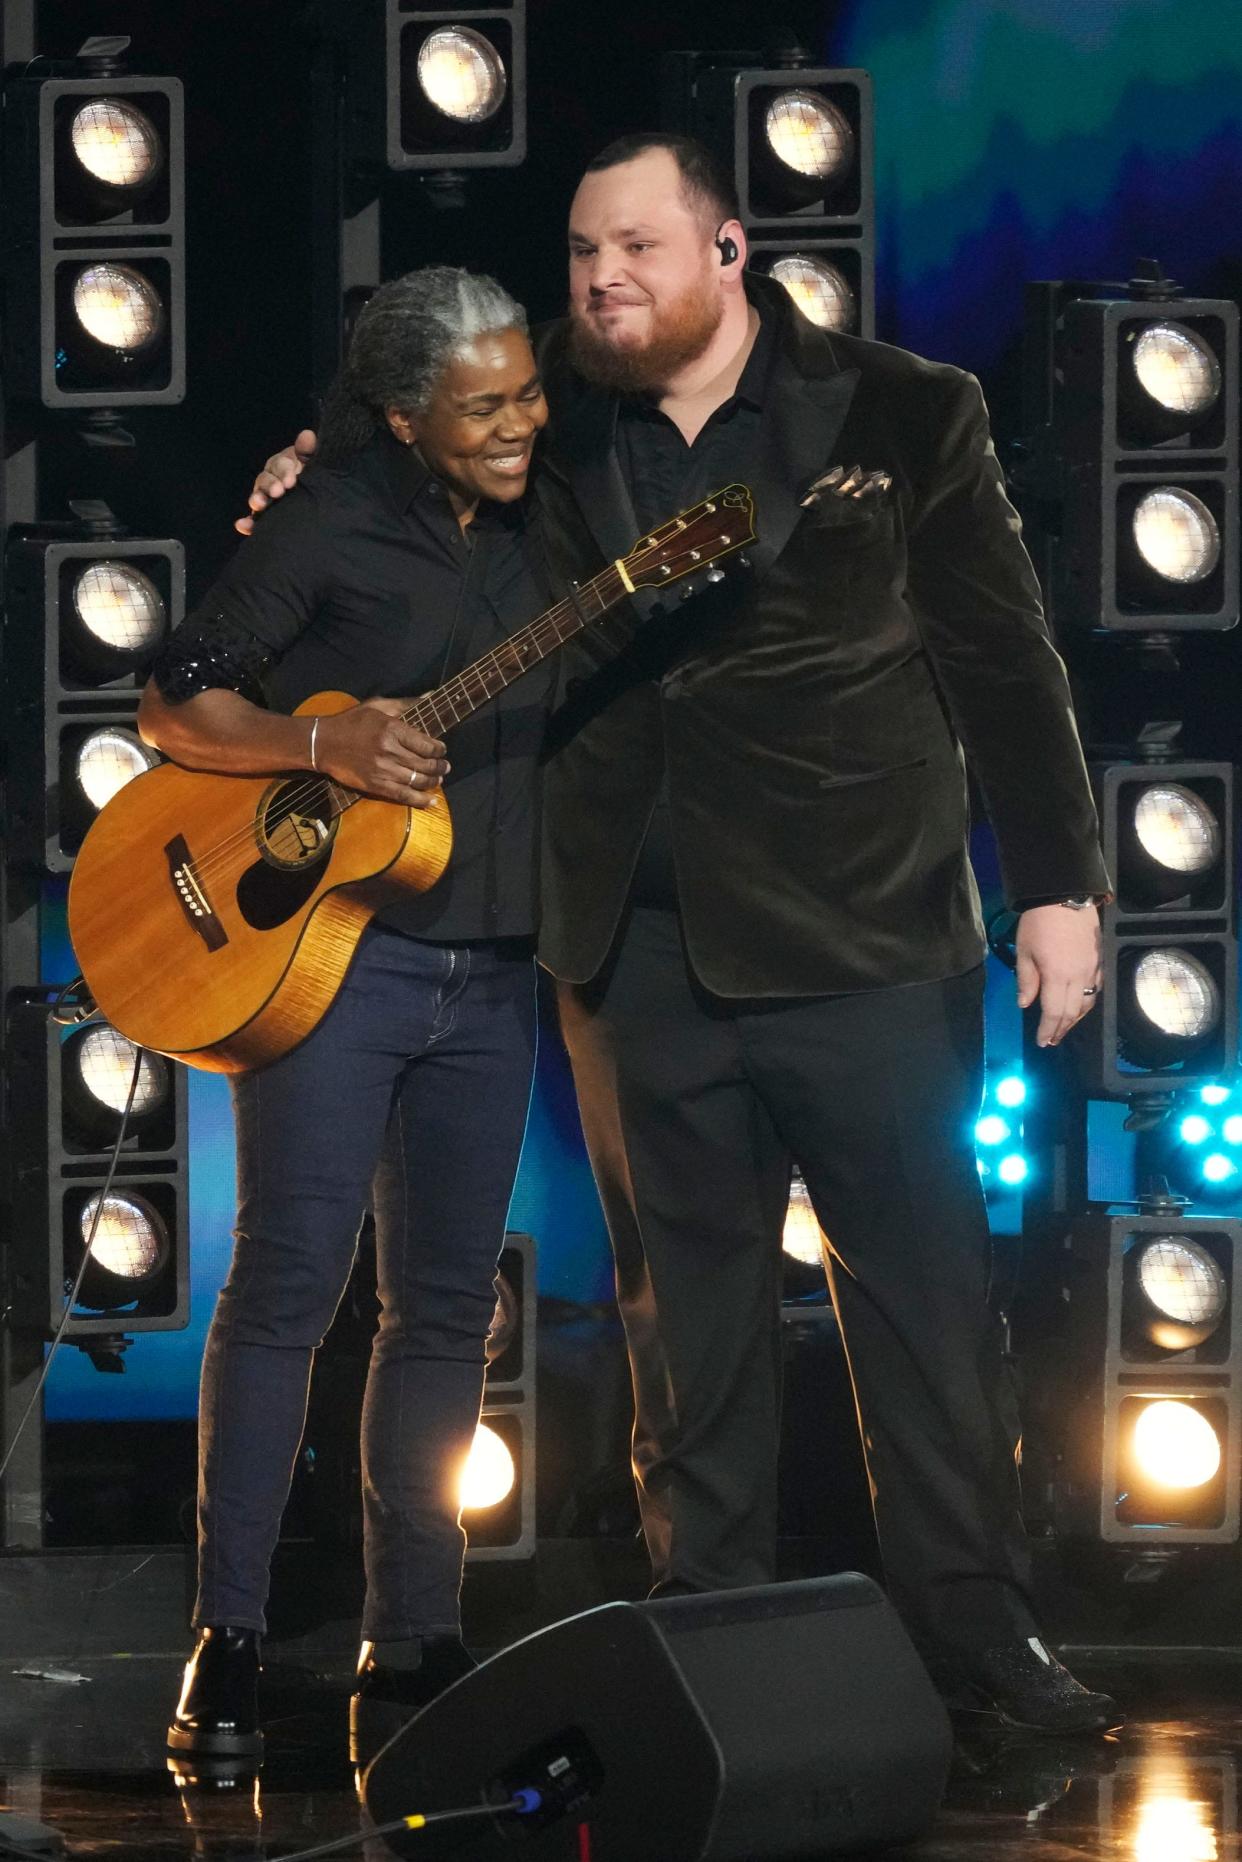 Tracy Chapman and Luke Combs hug after performing "Fast Car" during the 66th Annual Grammy Awards in Los Angeles on Sundat.